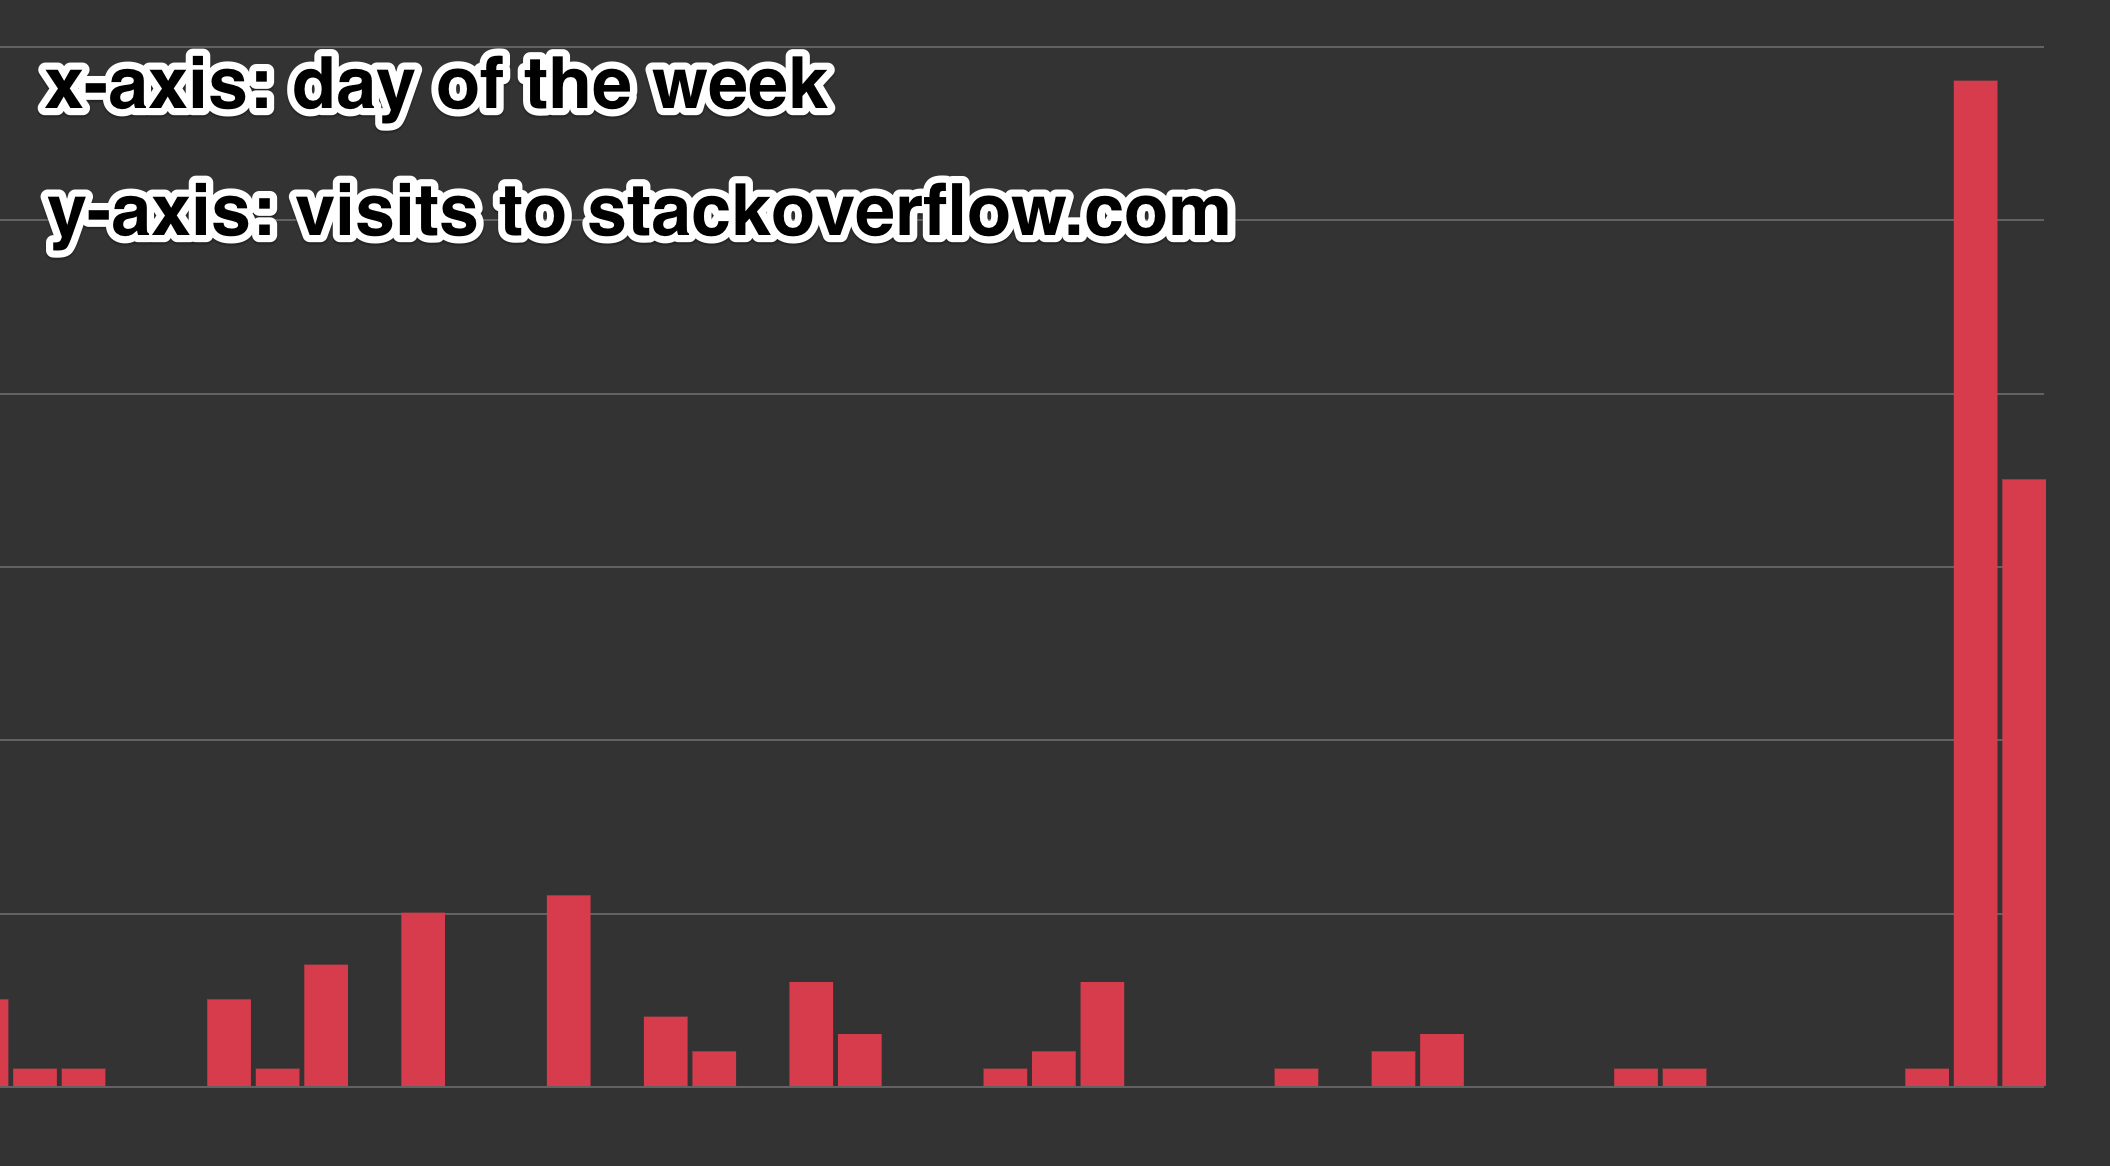 A graph representing the number of visits I usually make to StackOverflow